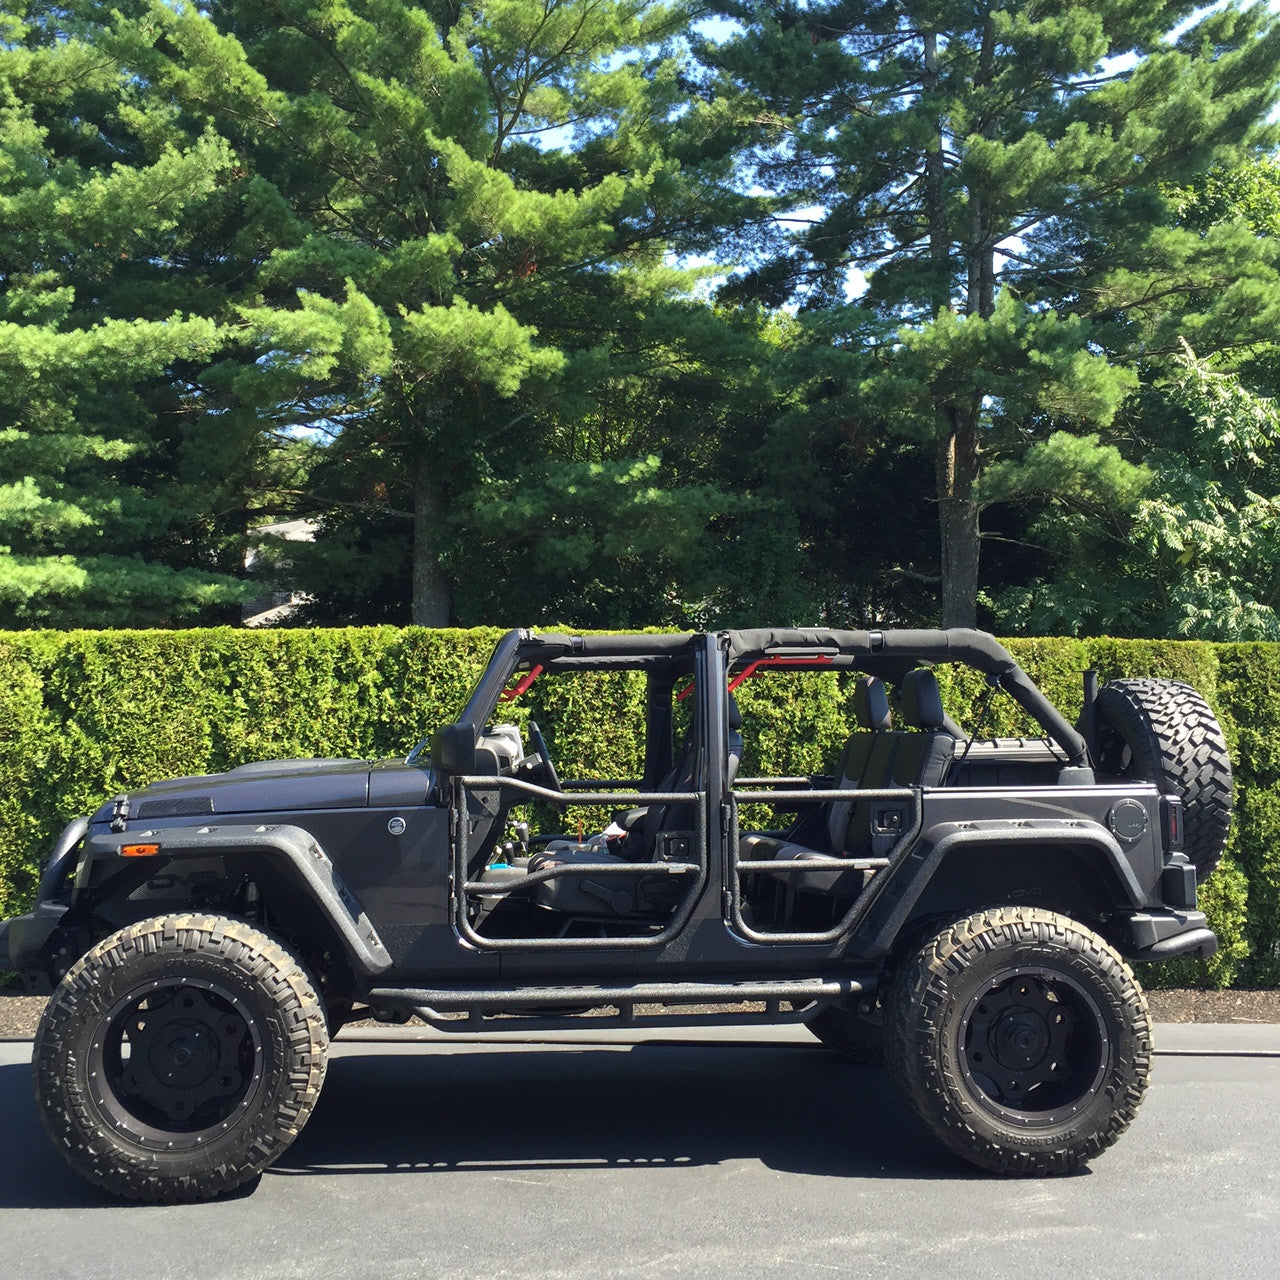 Jeep Tube Doors- Why a Popular Choice amongst Jeep Enthusiasts?